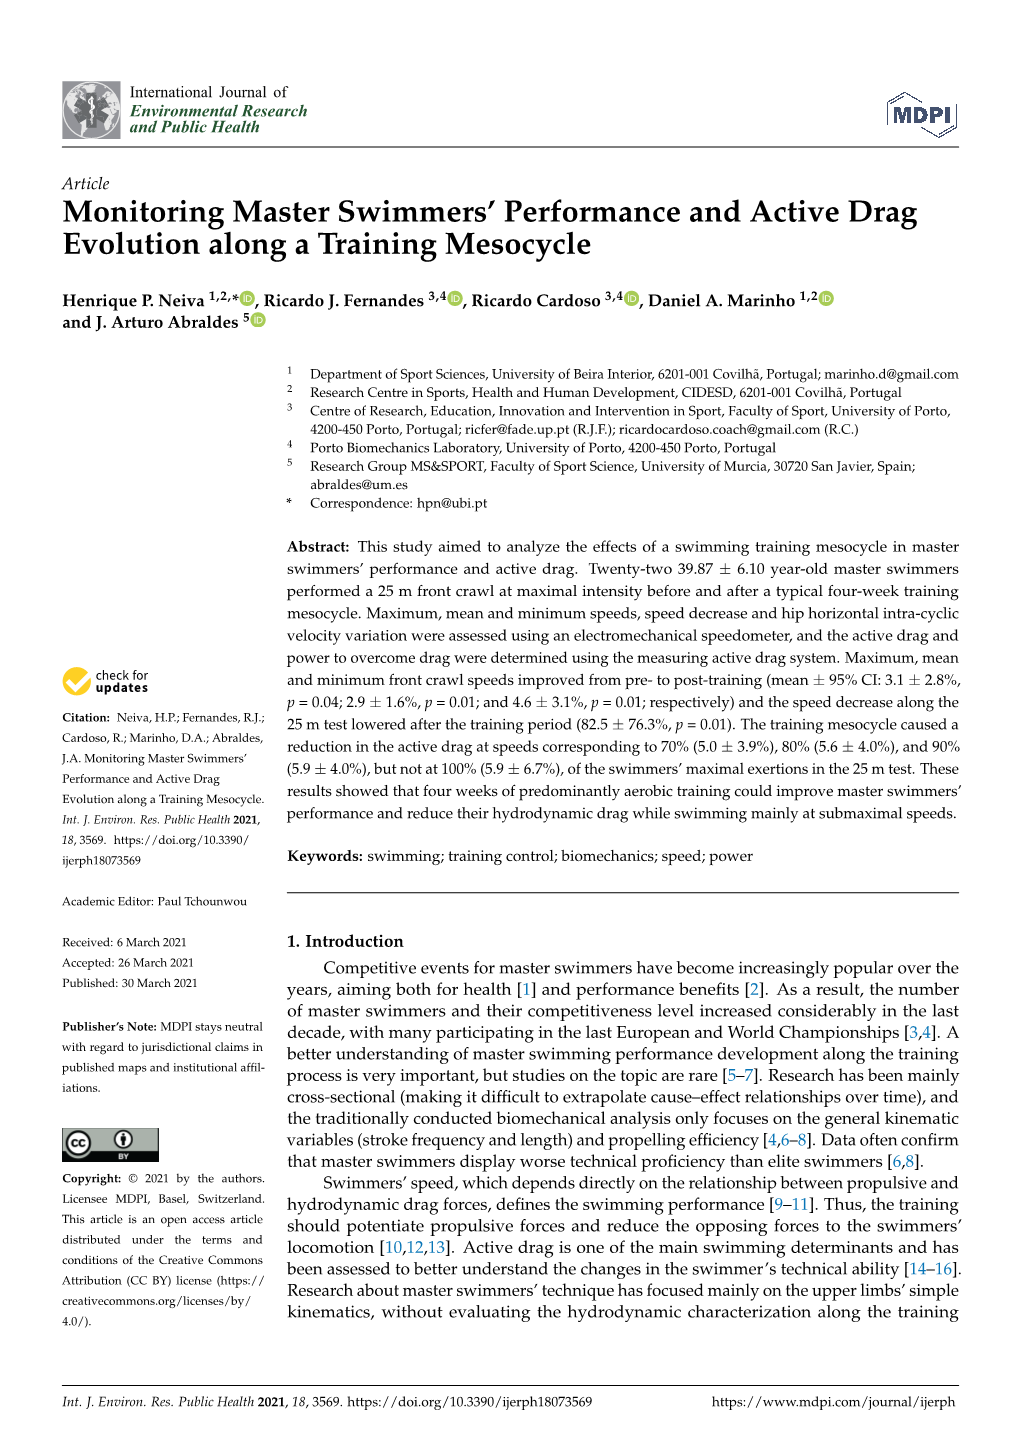 Monitoring Master Swimmers' Performance and Active Drag